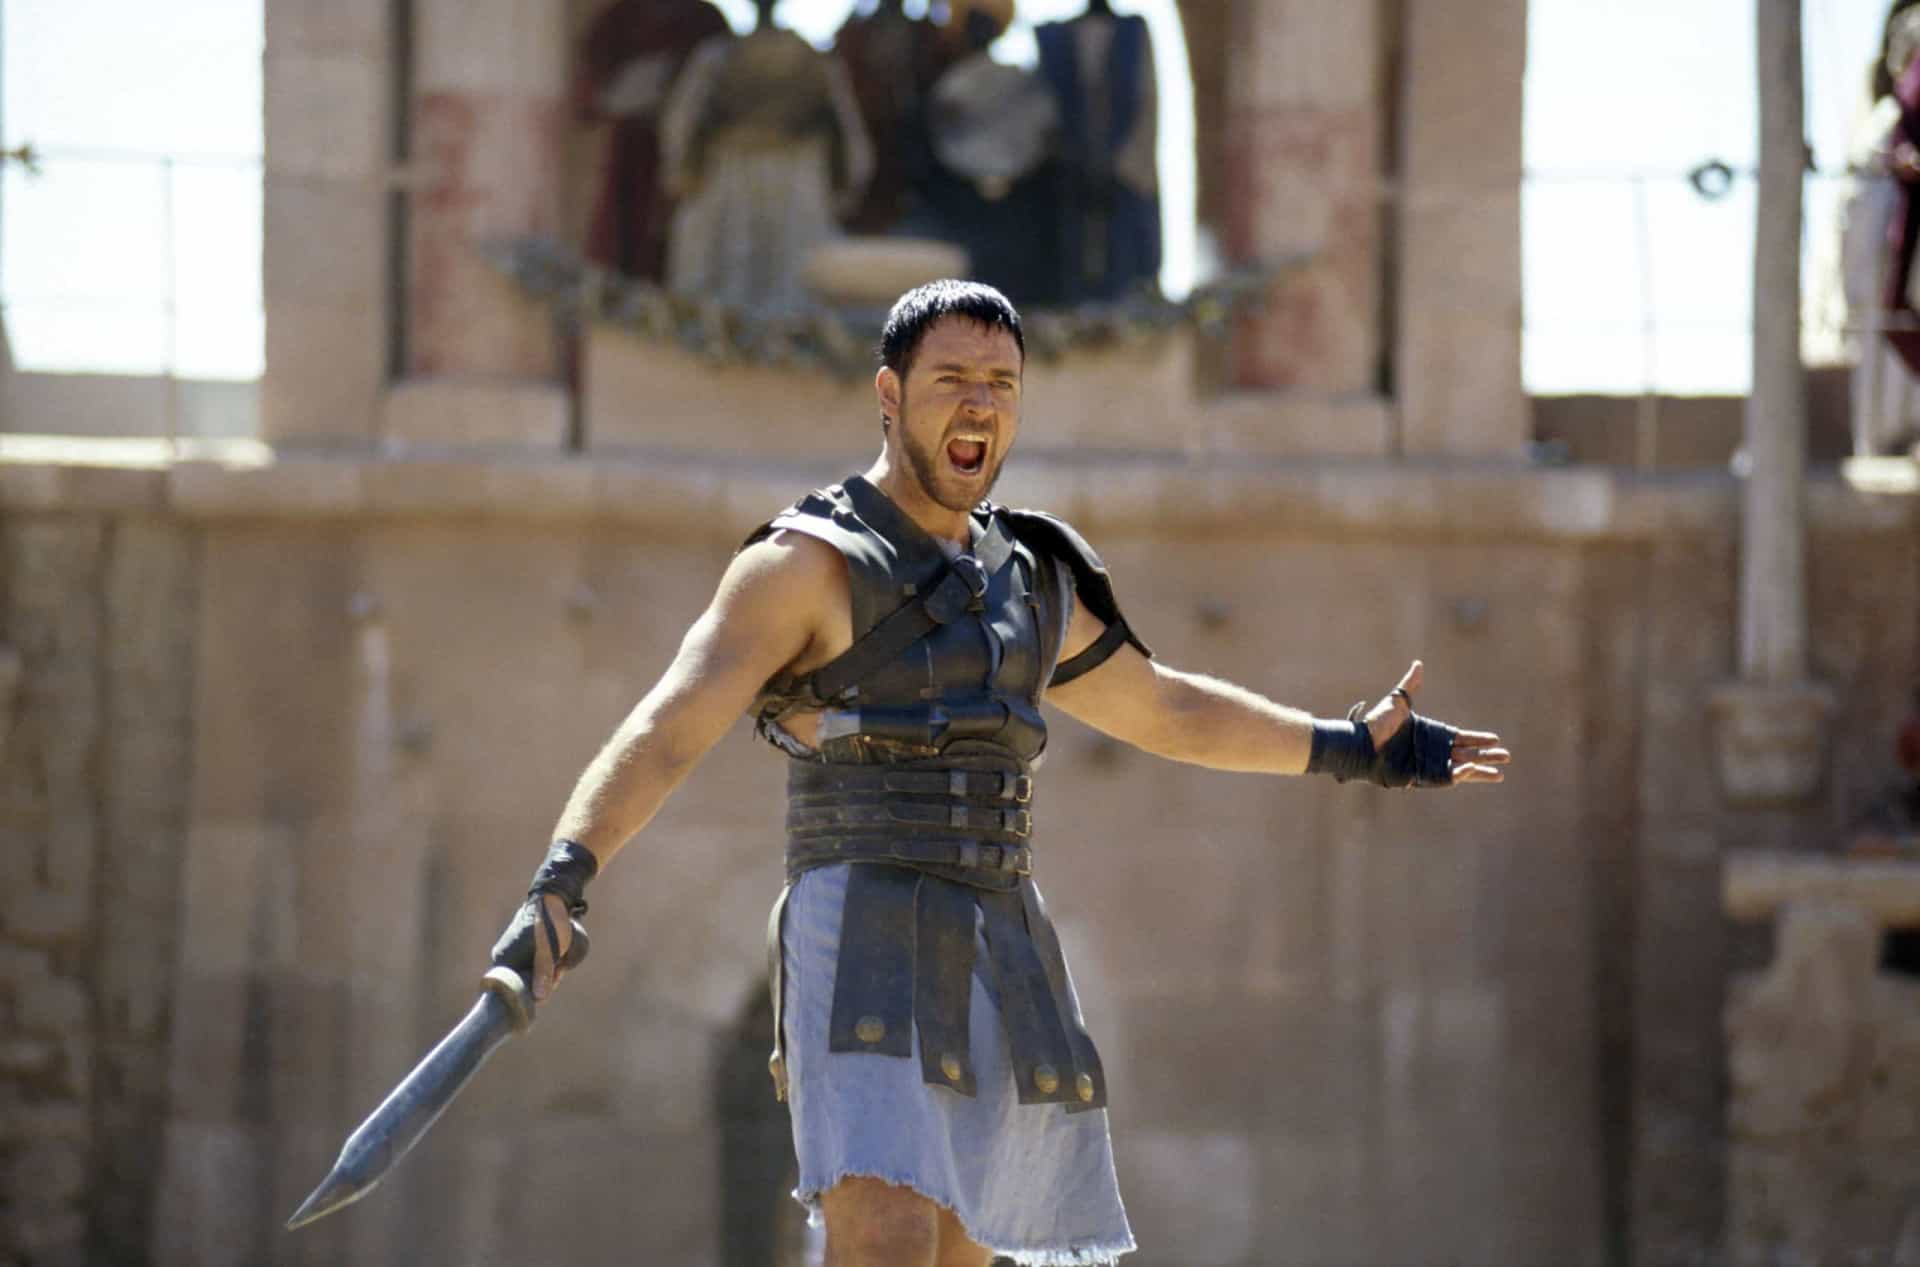 <p>Ridley Scott's 'Gladiator' on the other hand was a huge award-winning film starring Russell Crowe as gladiator Maximus.</p><p>You may also like:<a href="https://www.starsinsider.com/n/119323?utm_source=msn.com&utm_medium=display&utm_campaign=referral_description&utm_content=519875en-us"> Meet the humans who look like dolls</a></p>